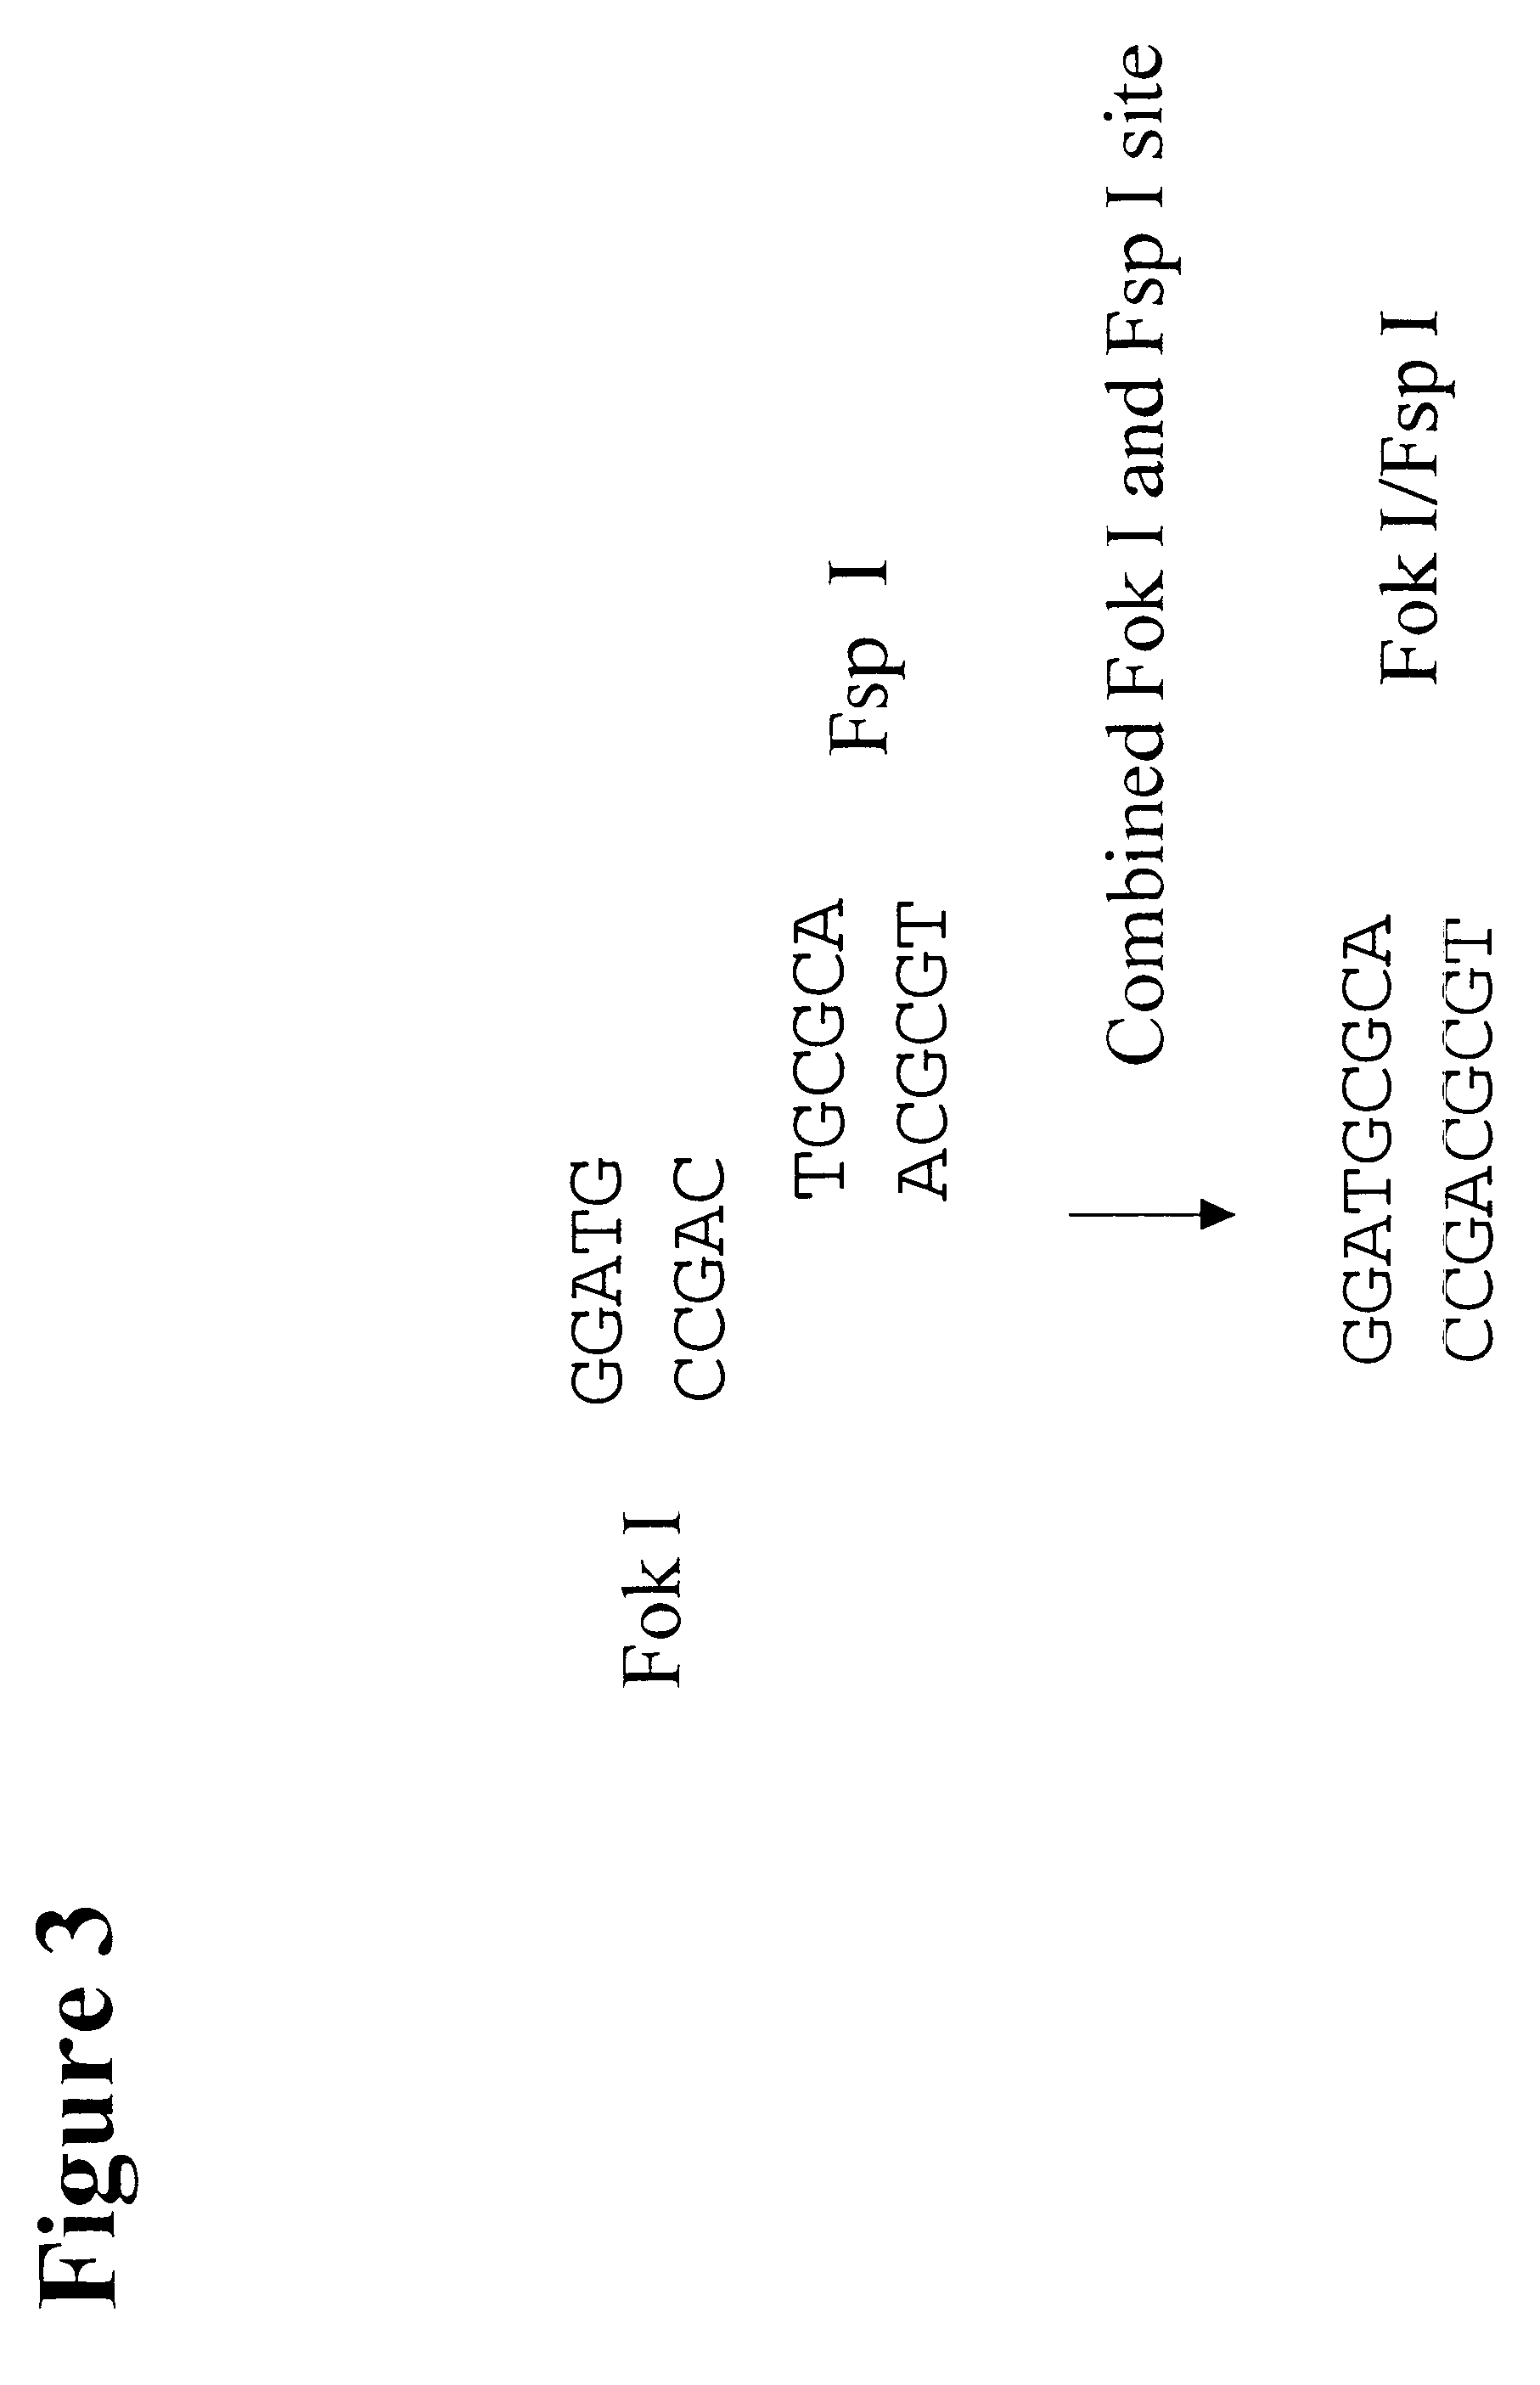 Methods for genetic analysis of DNA using biased amplification of polymorphic sites